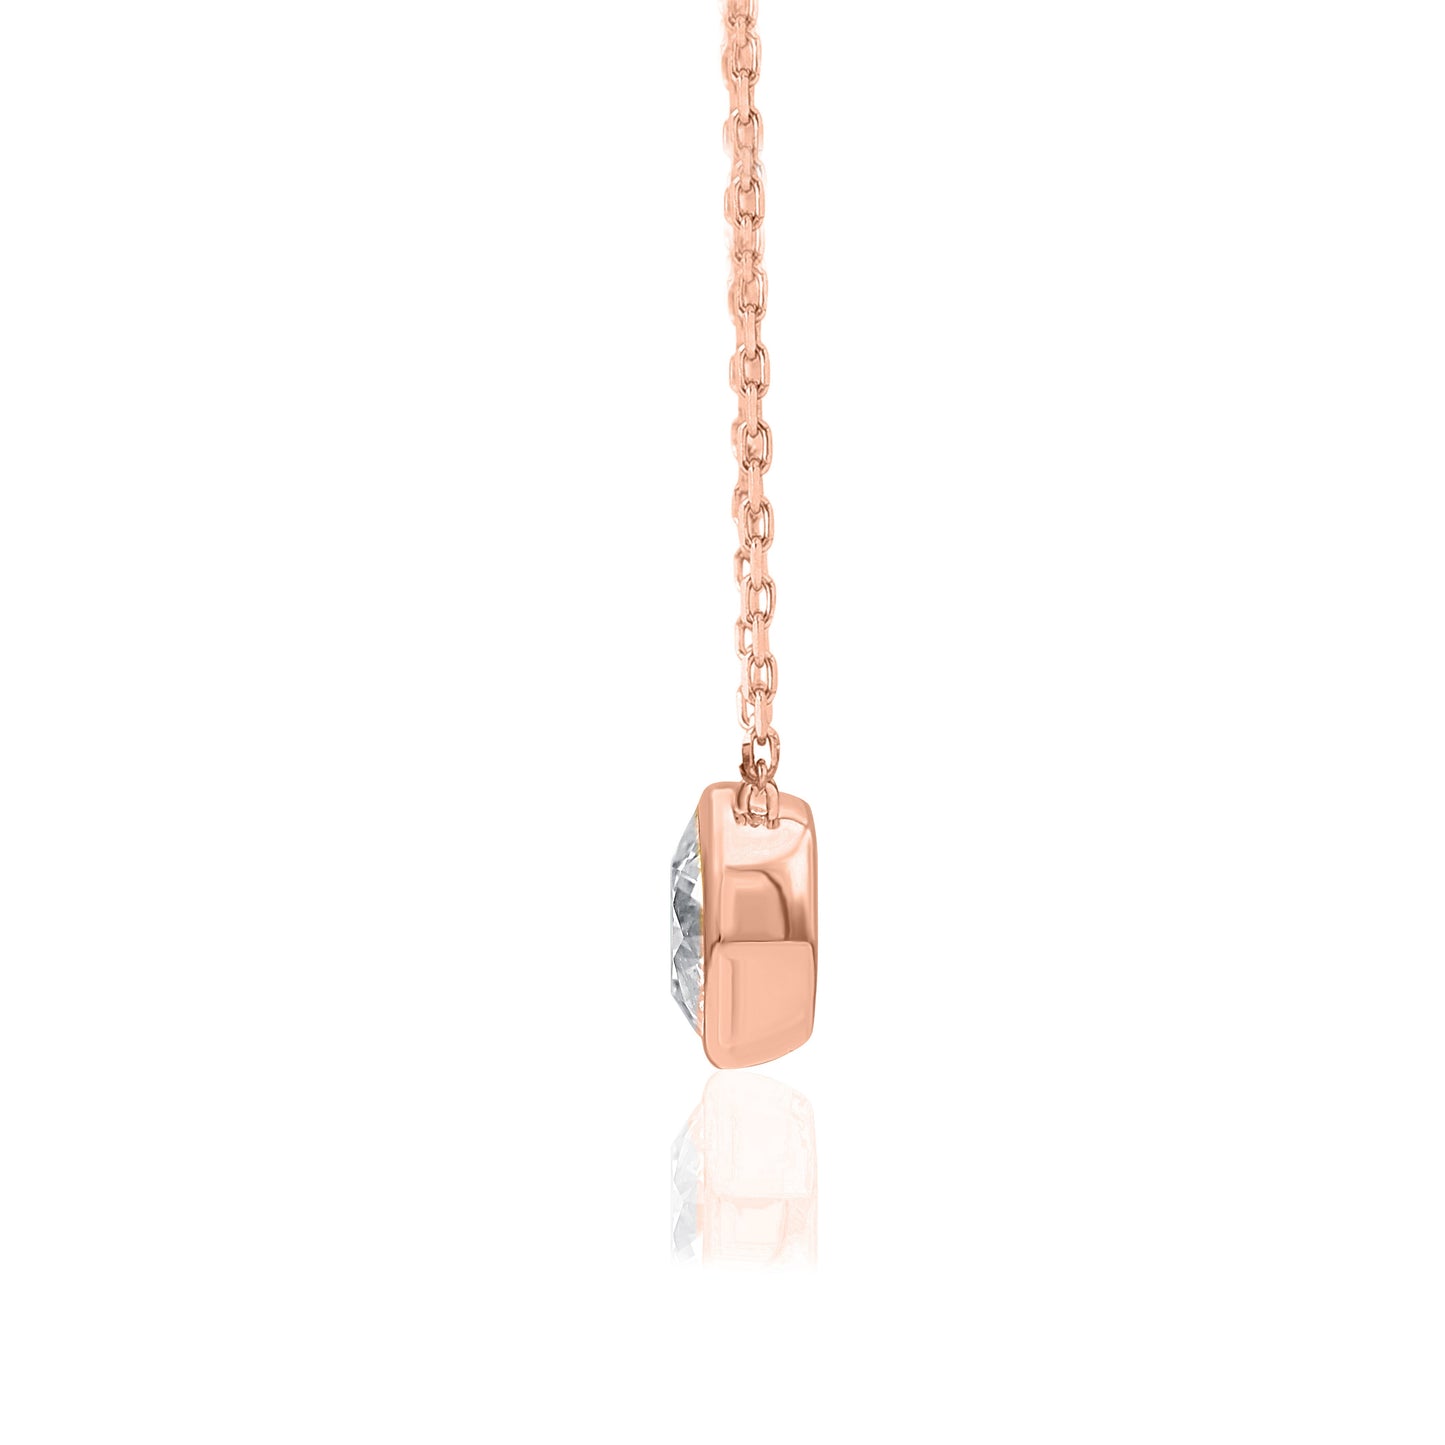 0.37 Carat Natural Diamond Halo Pendant Necklace in 10K Gold